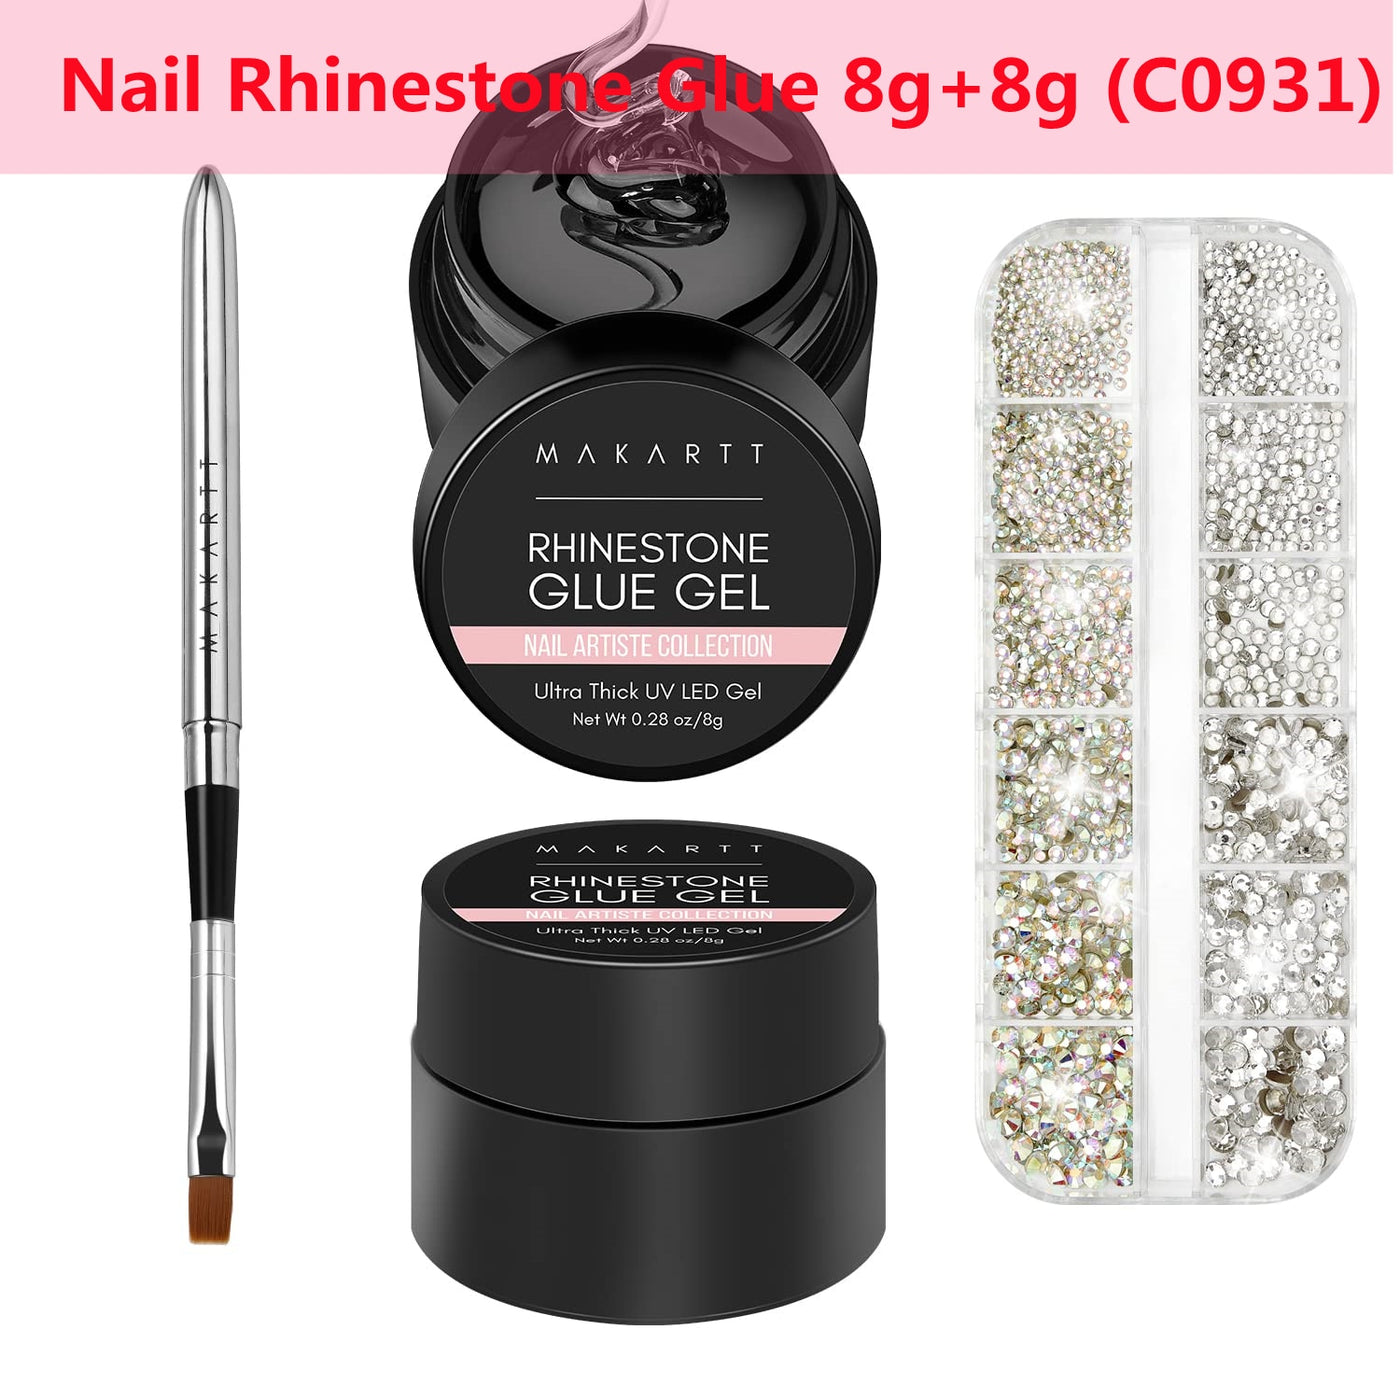 Super Sticky Adhesive Resin Nail Glue